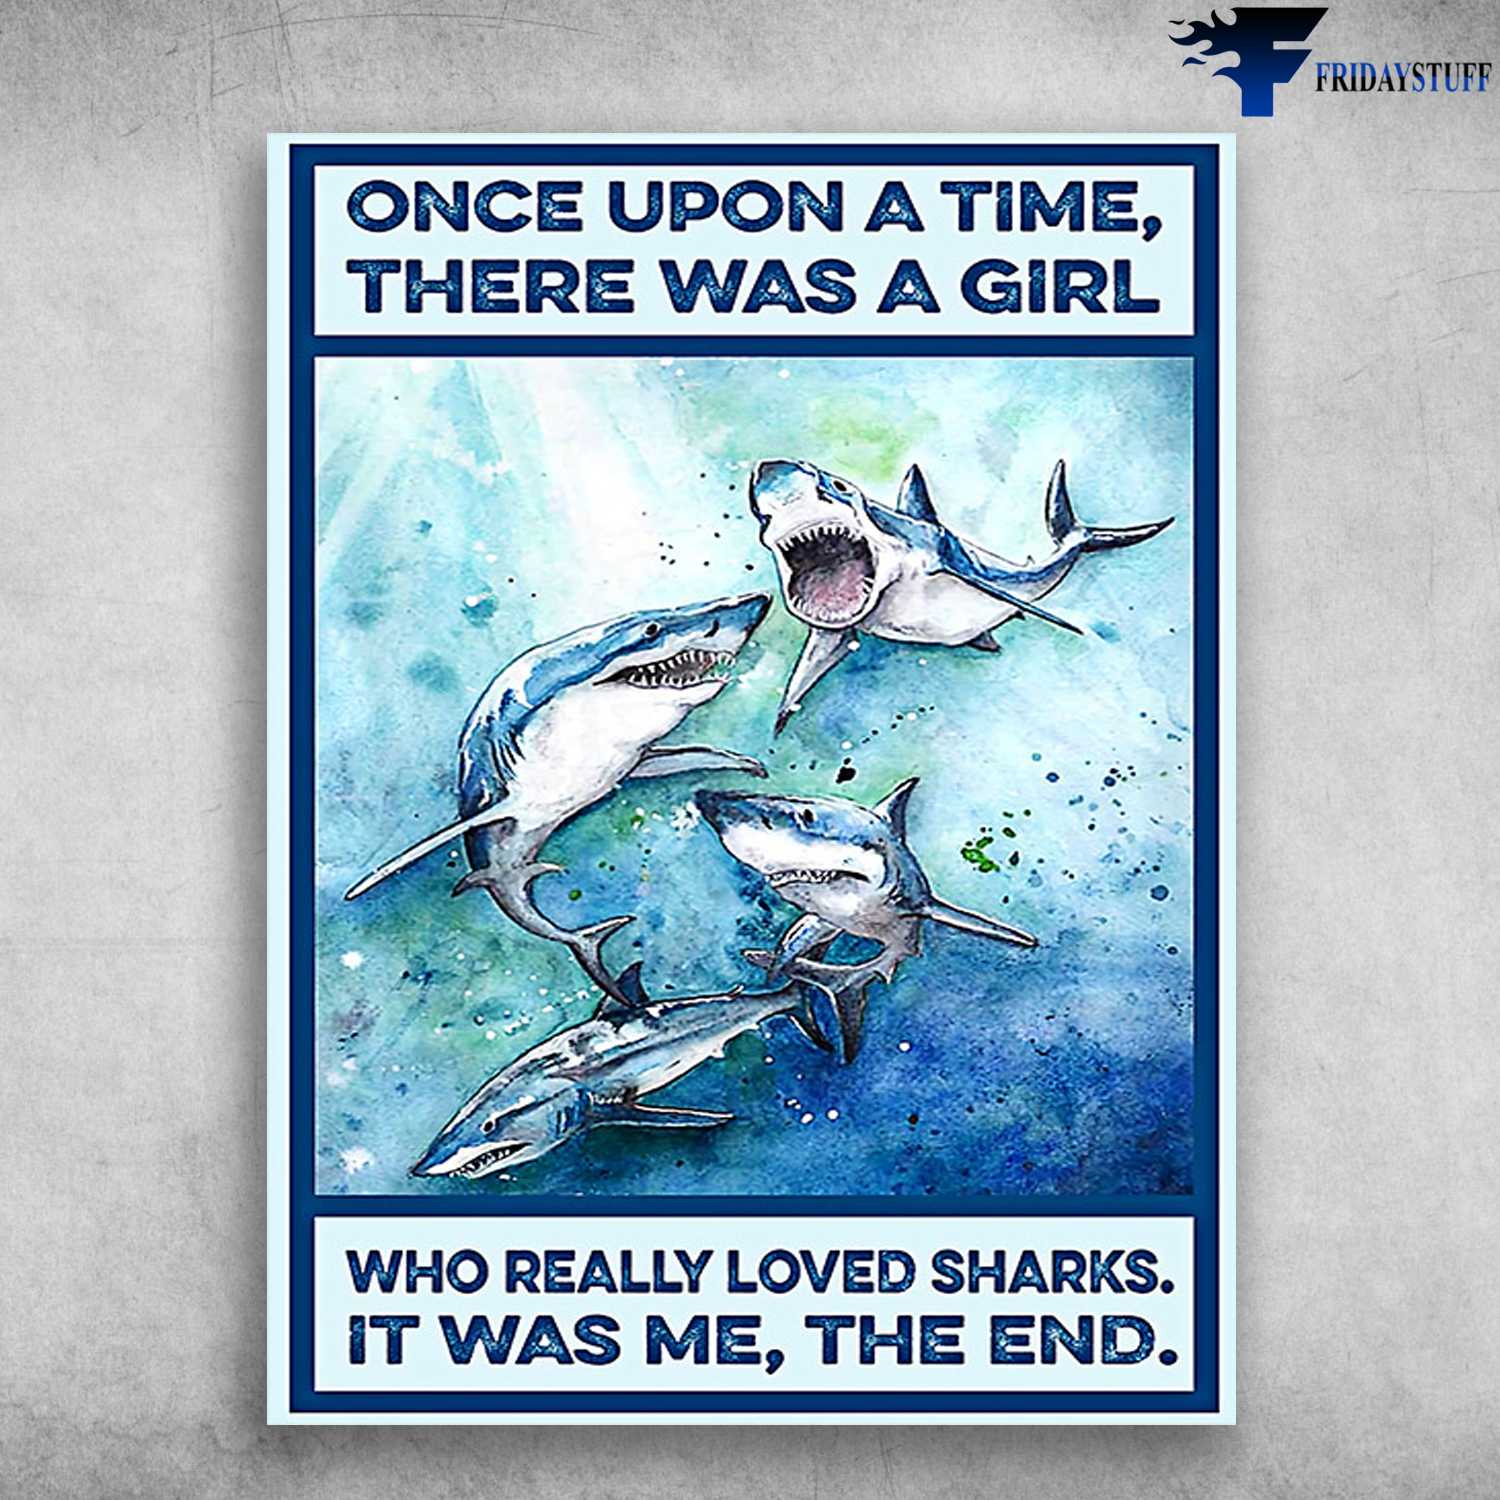 Shark Poster - Once Upon A Time, There Was A Girl, Who Really Loved Sharks, It Was Me, The EndShark Poster - Once Upon A Time, There Was A Girl, Who Really Loved Sharks, It Was Me, The End